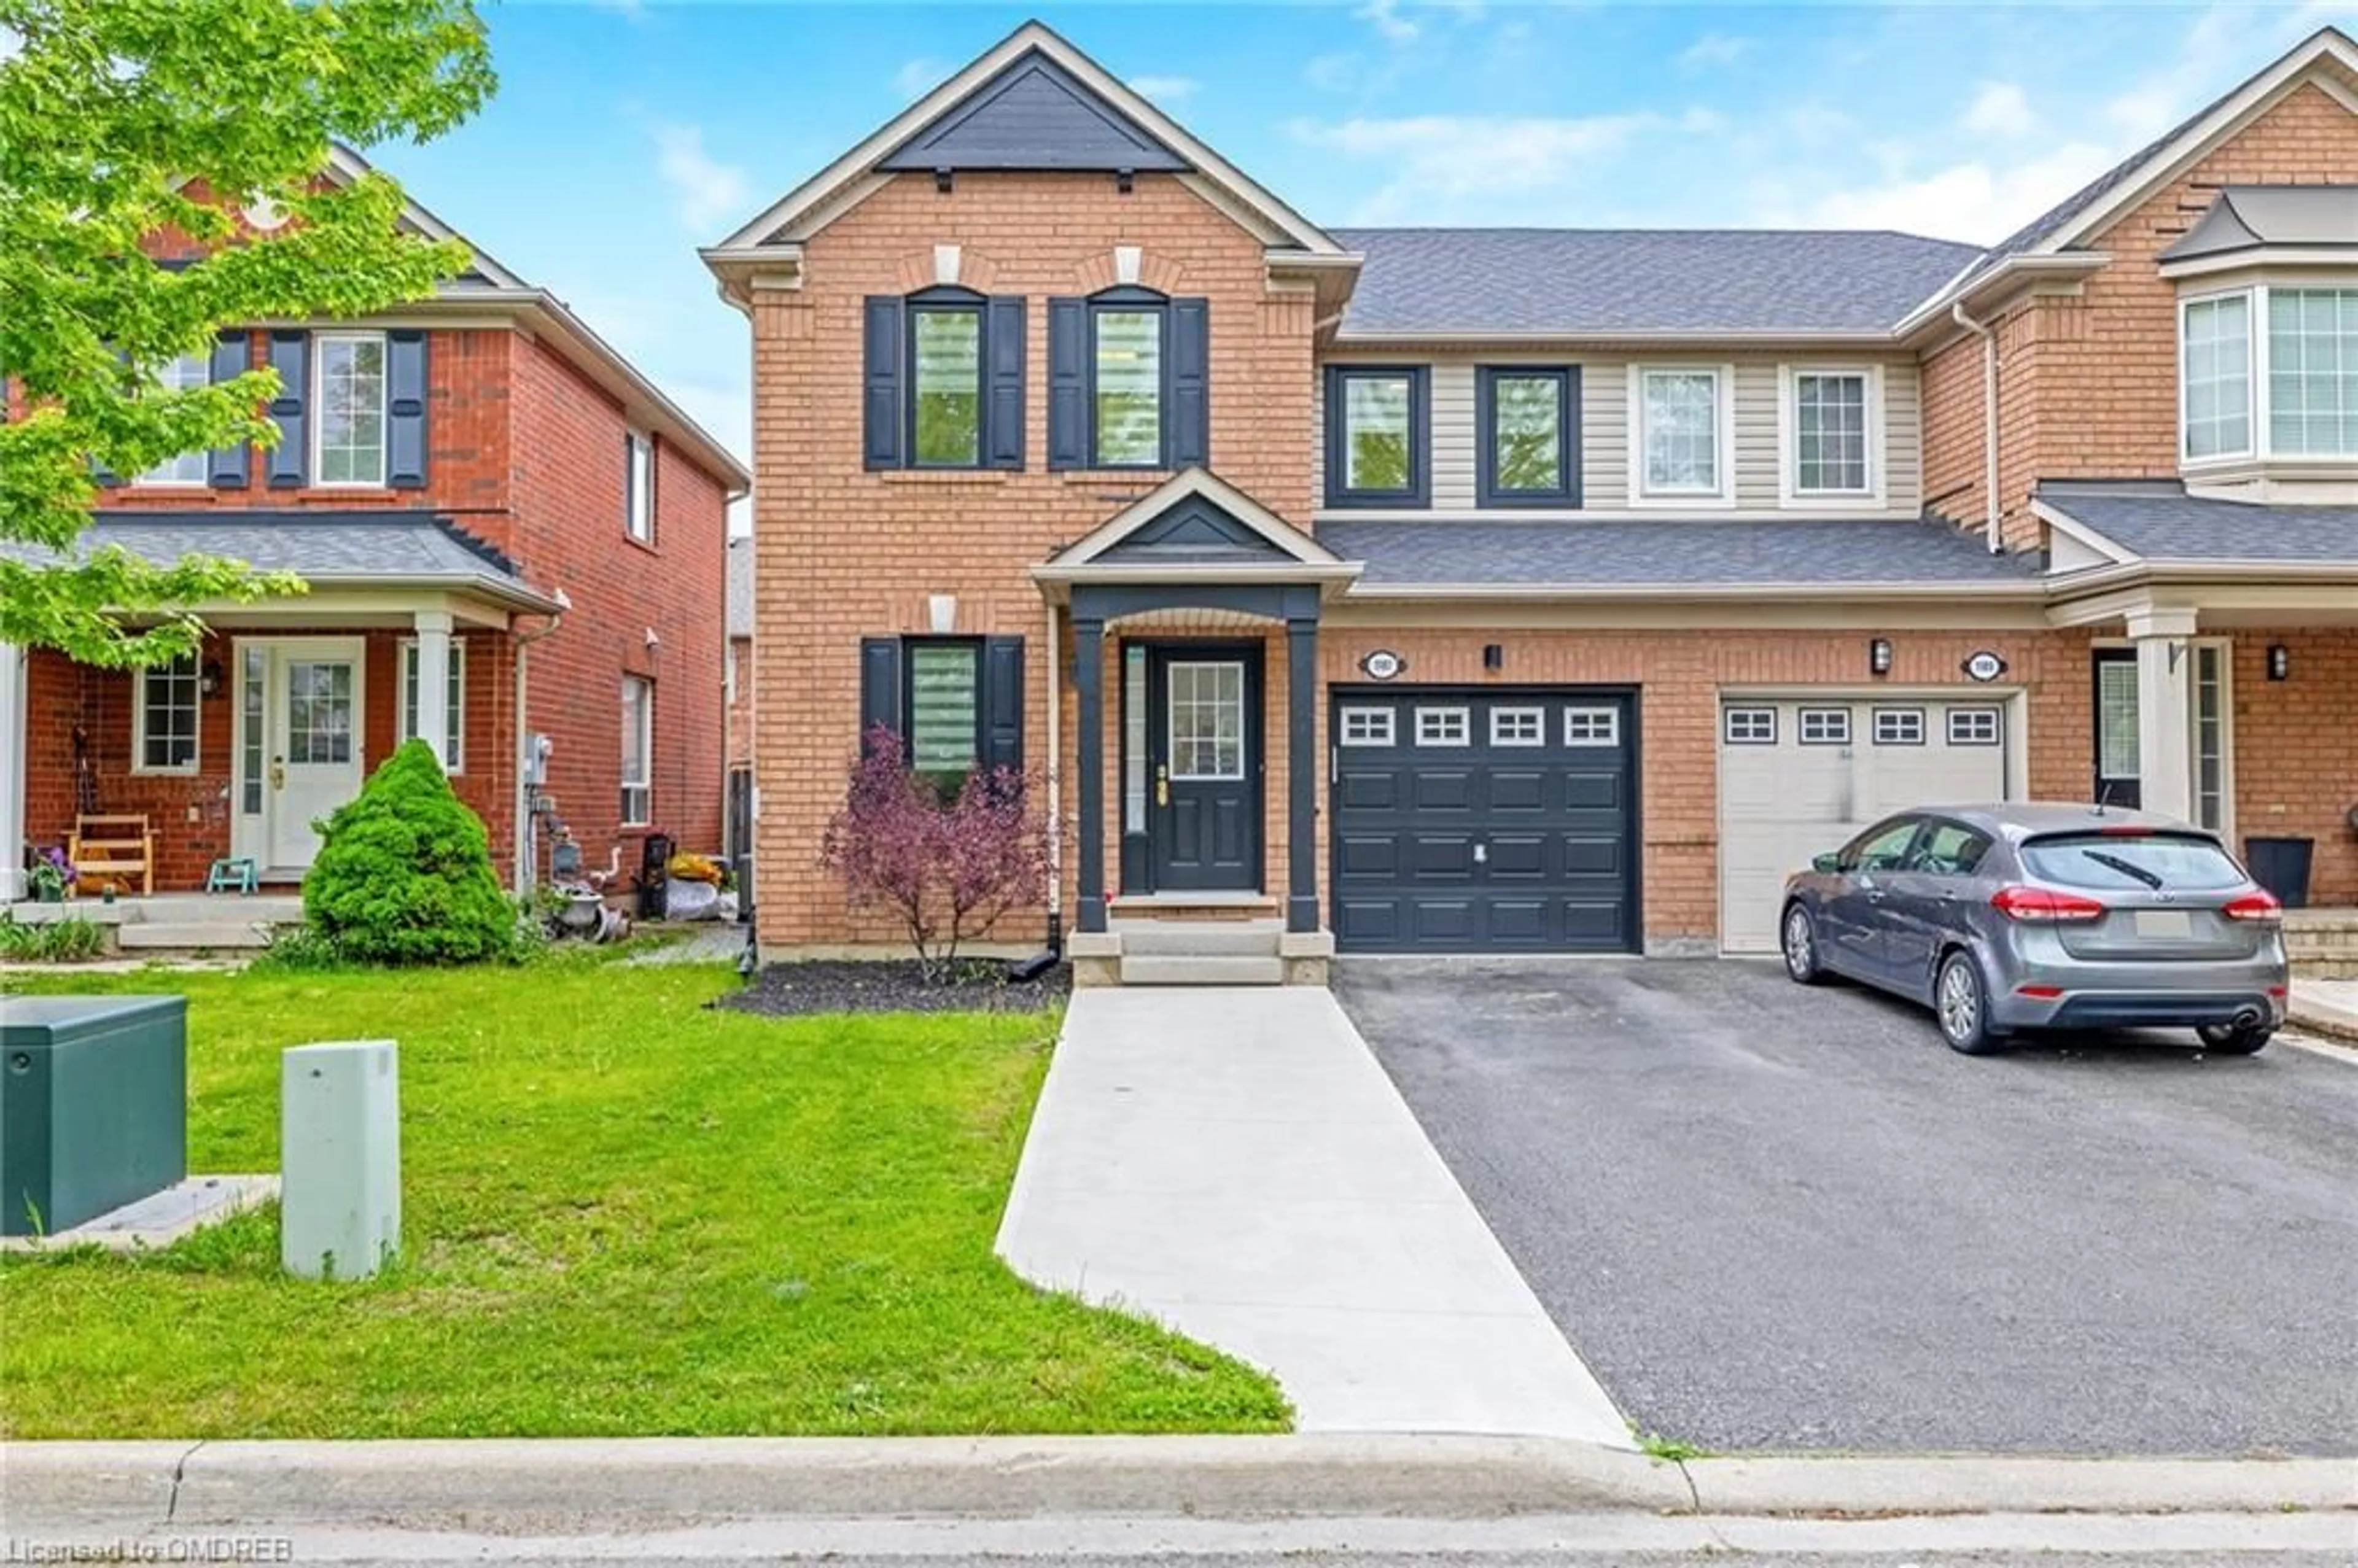 Home with brick exterior material for 1187 Barclay Cir, Milton Ontario L9T 5W5